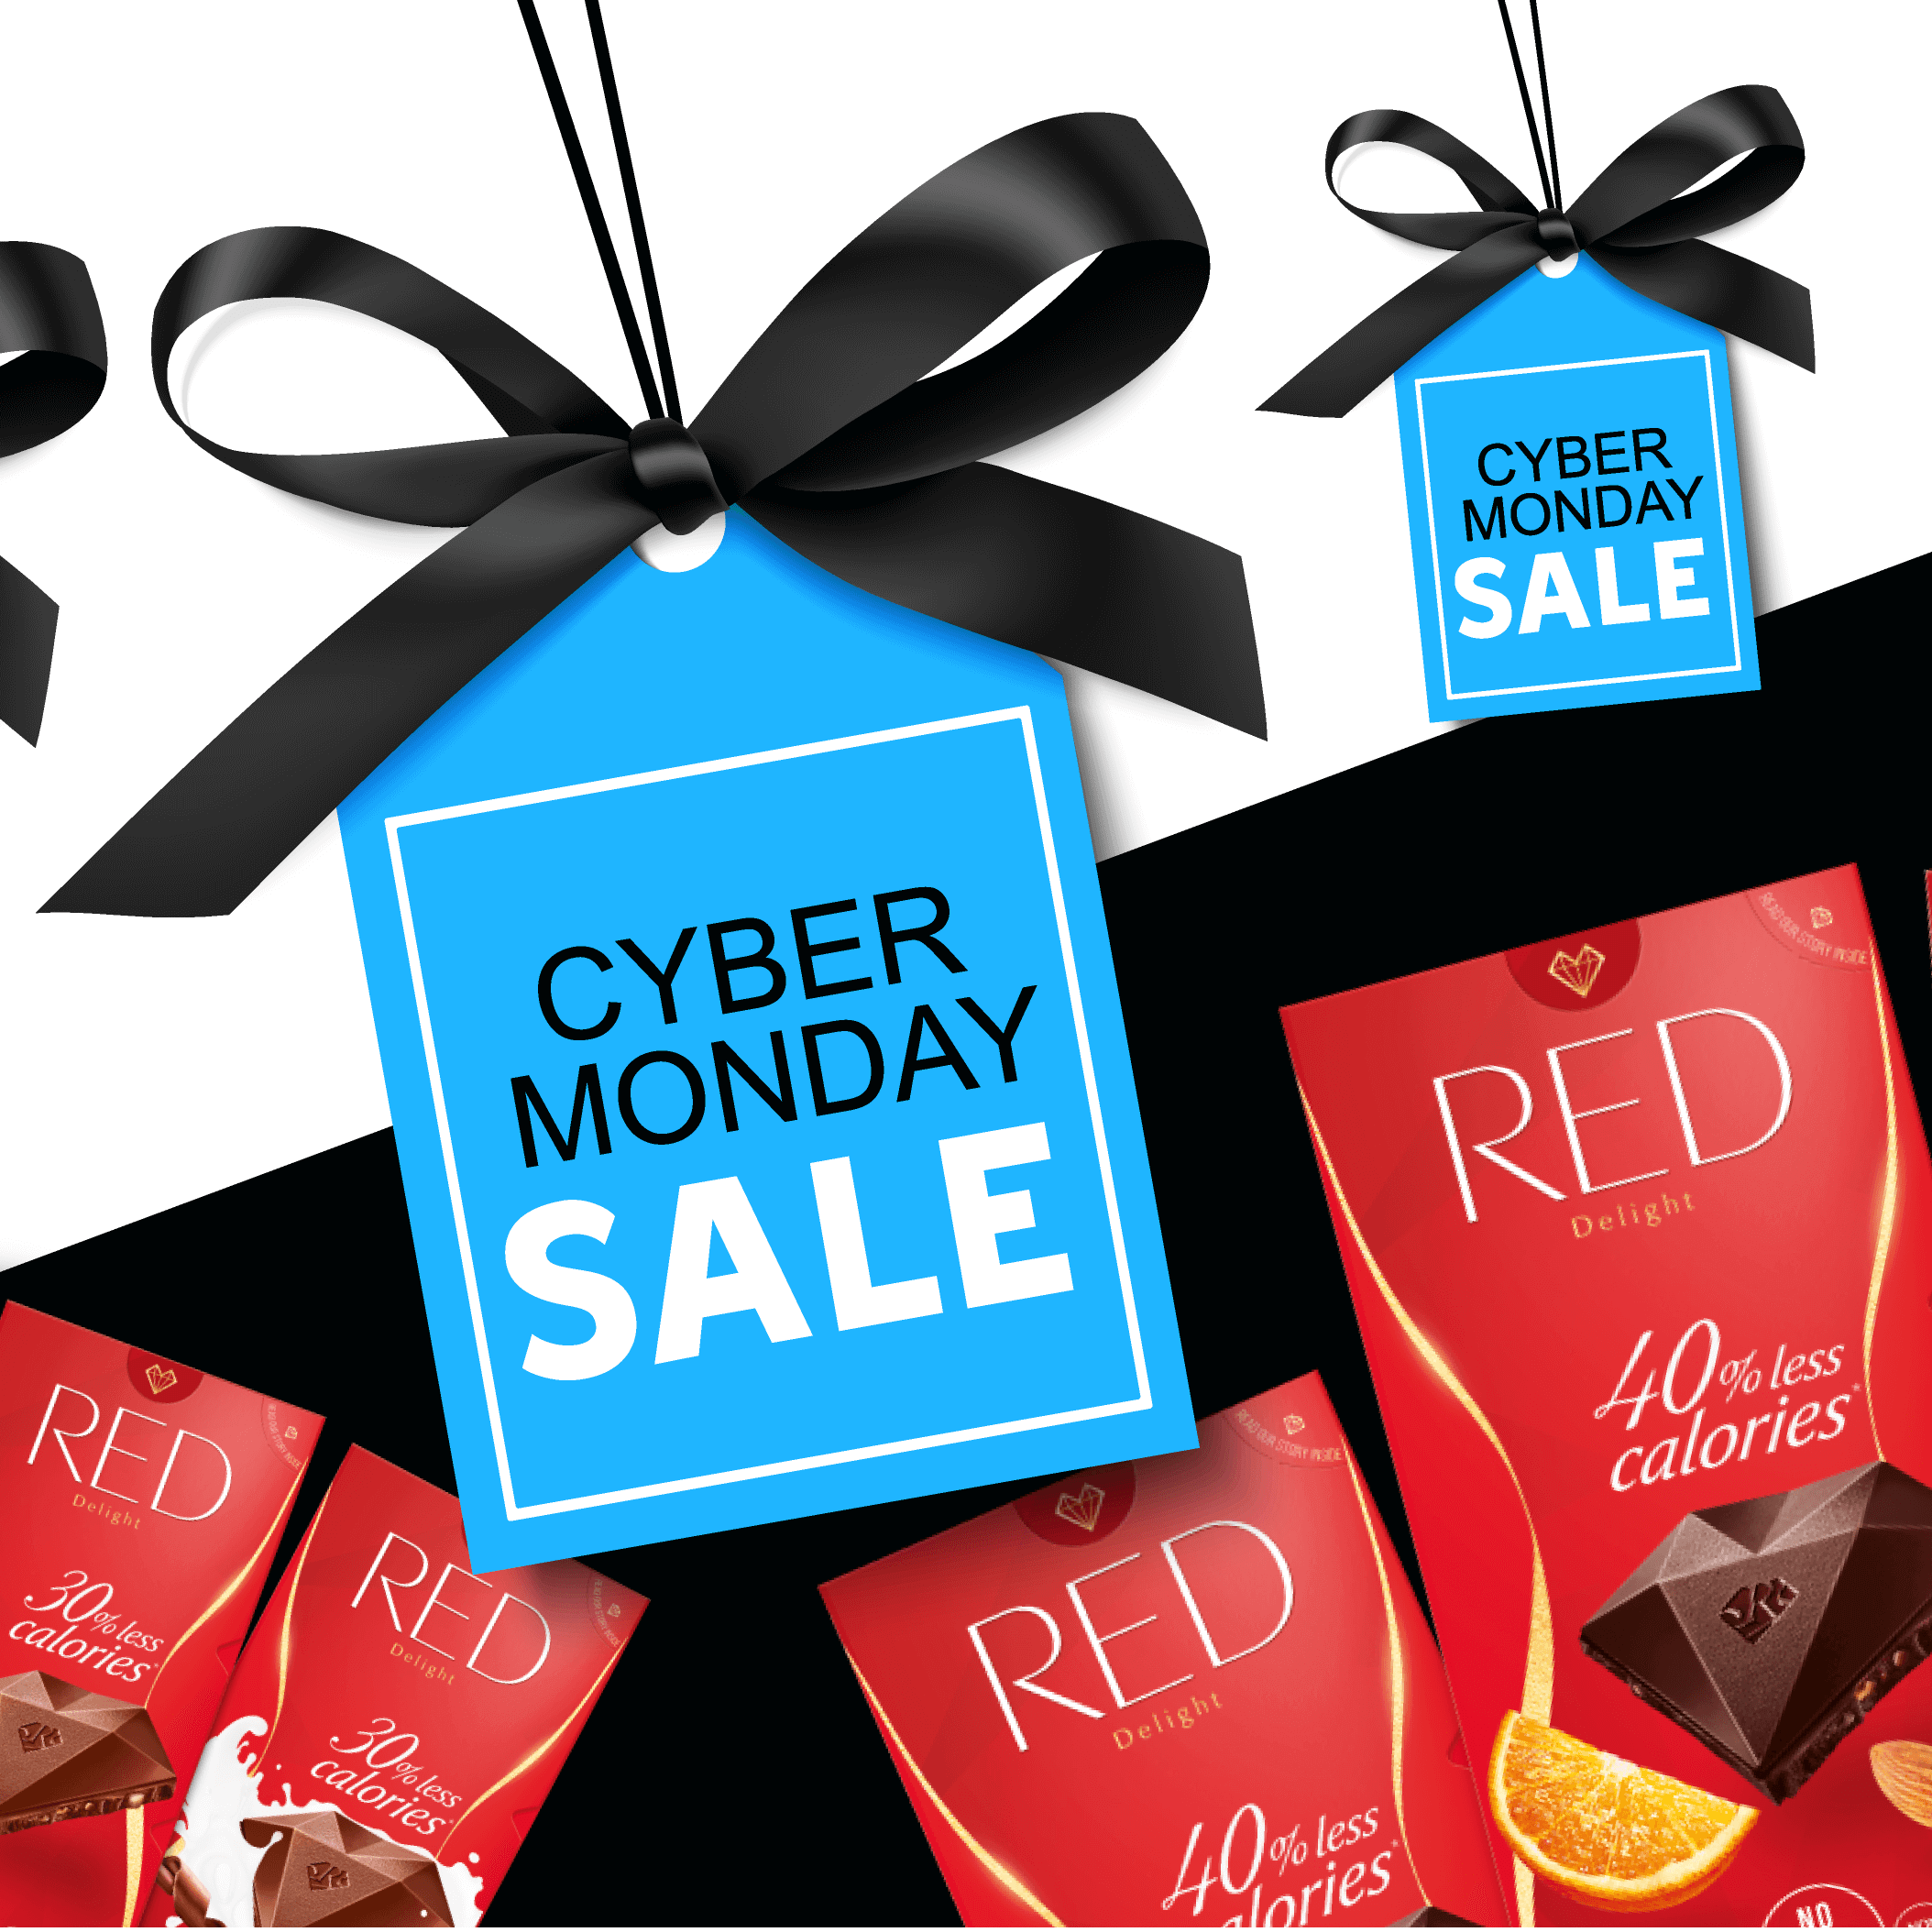 OUR CYBER MONDAY SALE IS HERE! RED